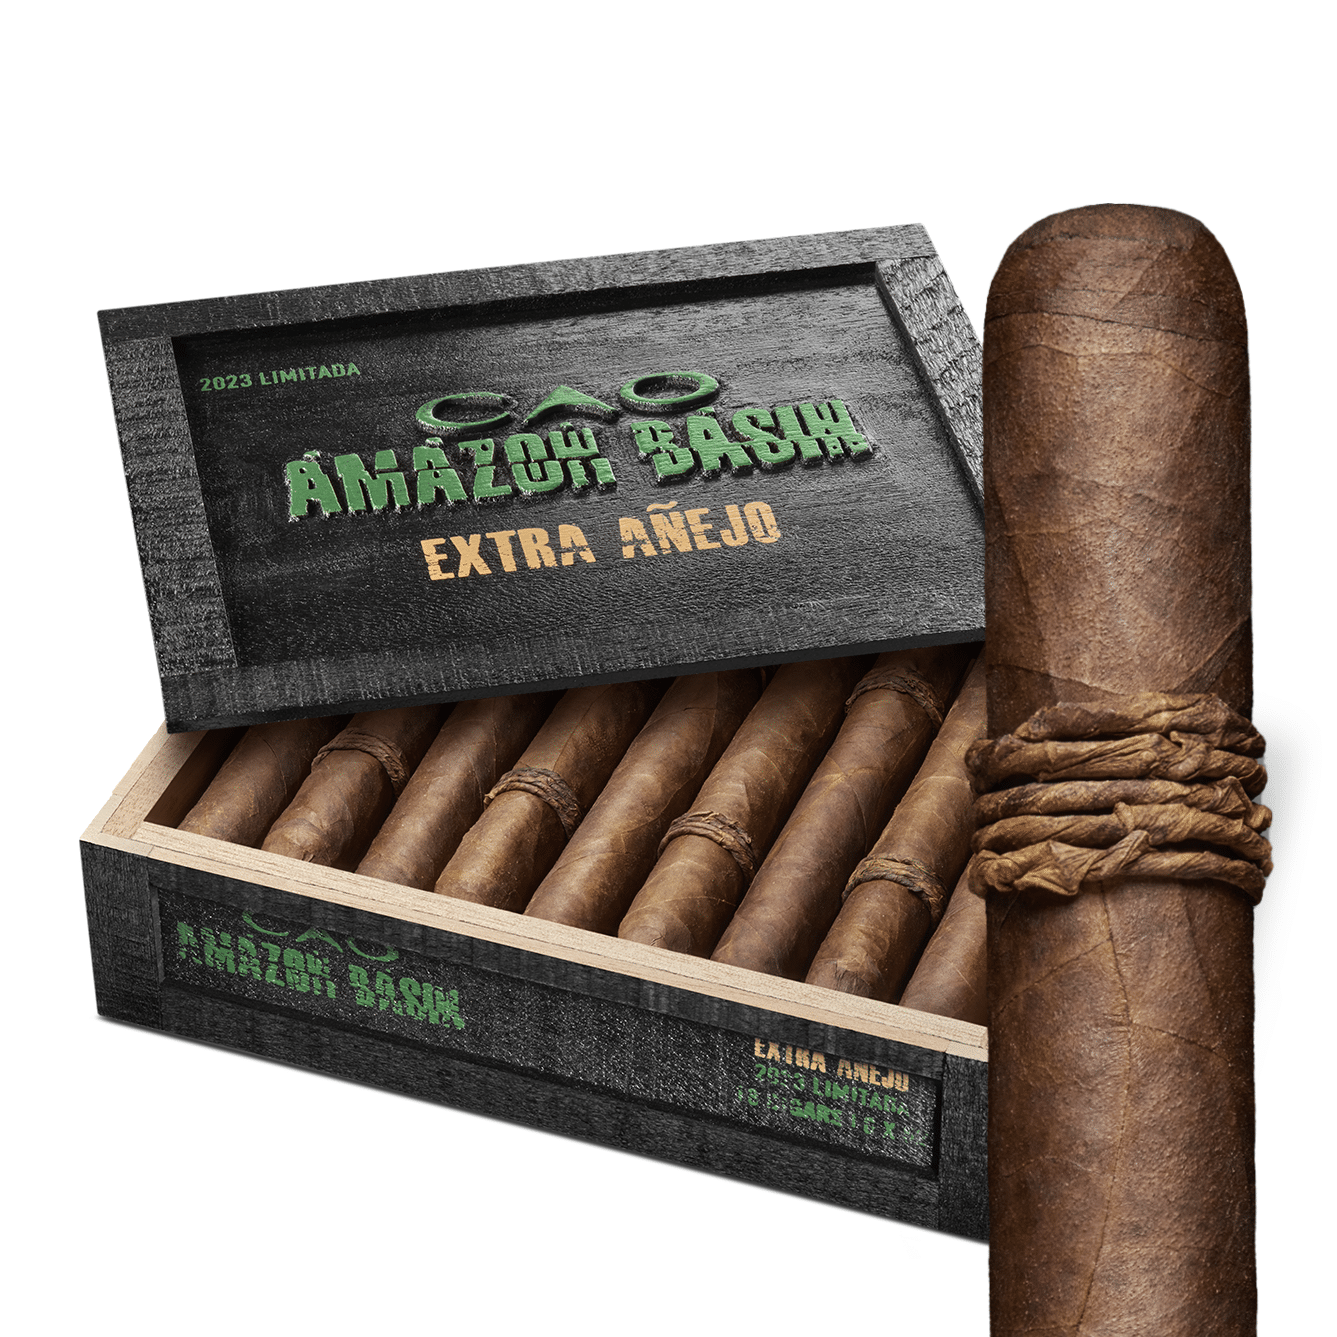 https://nhcigars.com/wp-content/uploads/2022/12/cao-amazon-basin-extra-anejo-cigars.png